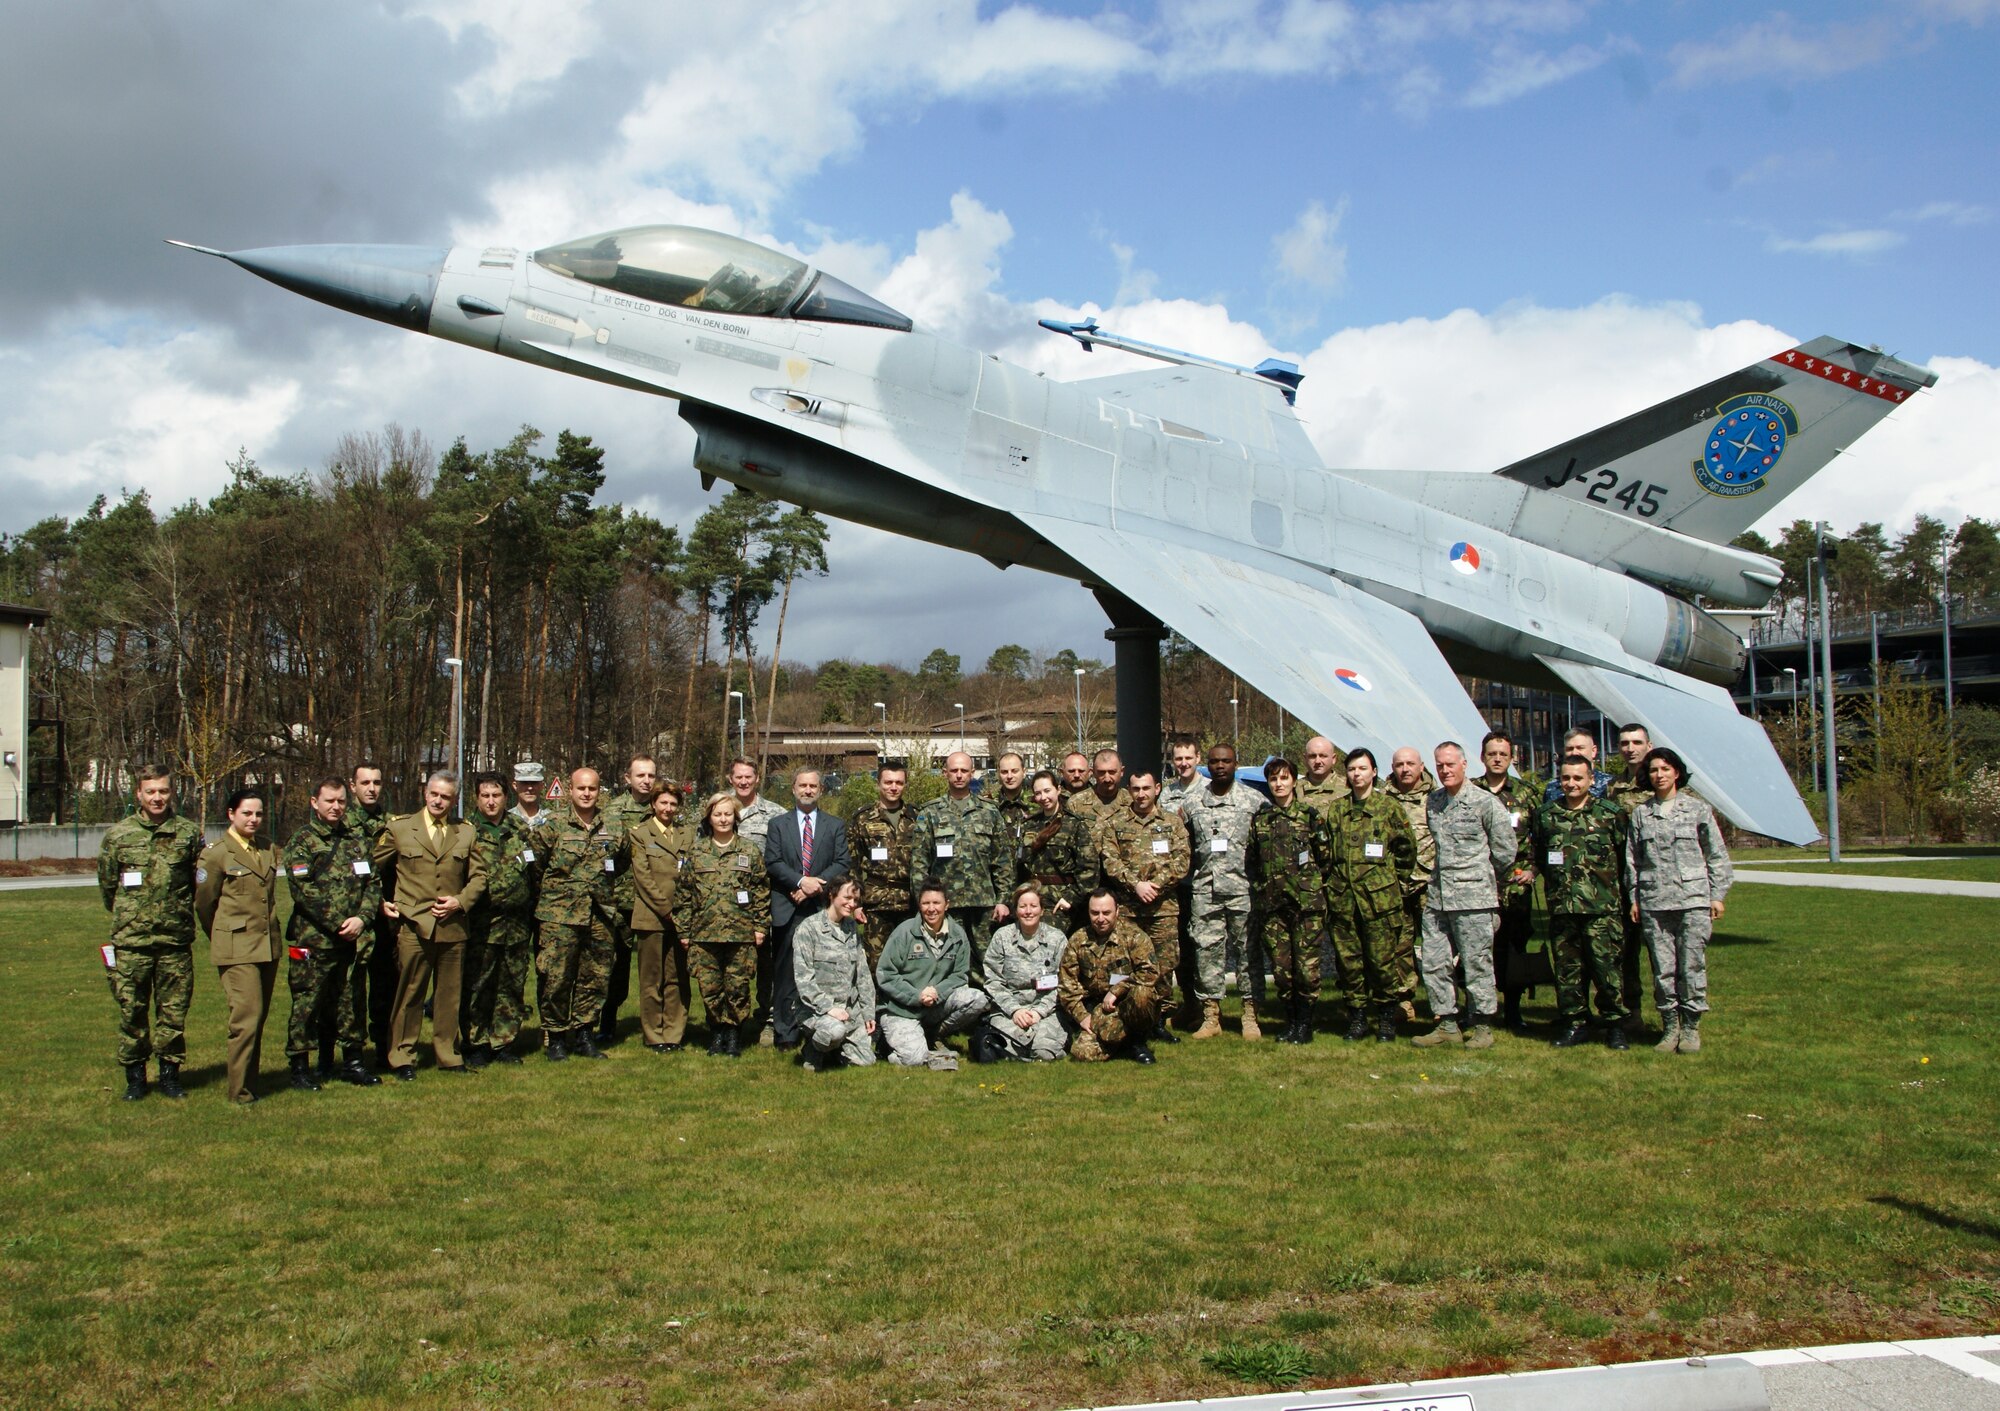 RAMSTEIN AIR BASE, Germany – Attendees of the International Health Symposium pose for a photo April 18, 2012. Representatives of the military medical community from 11 Partnership for Peace and NATO countries met to discuss common problems and solutions within the career field. (courtesy photo)